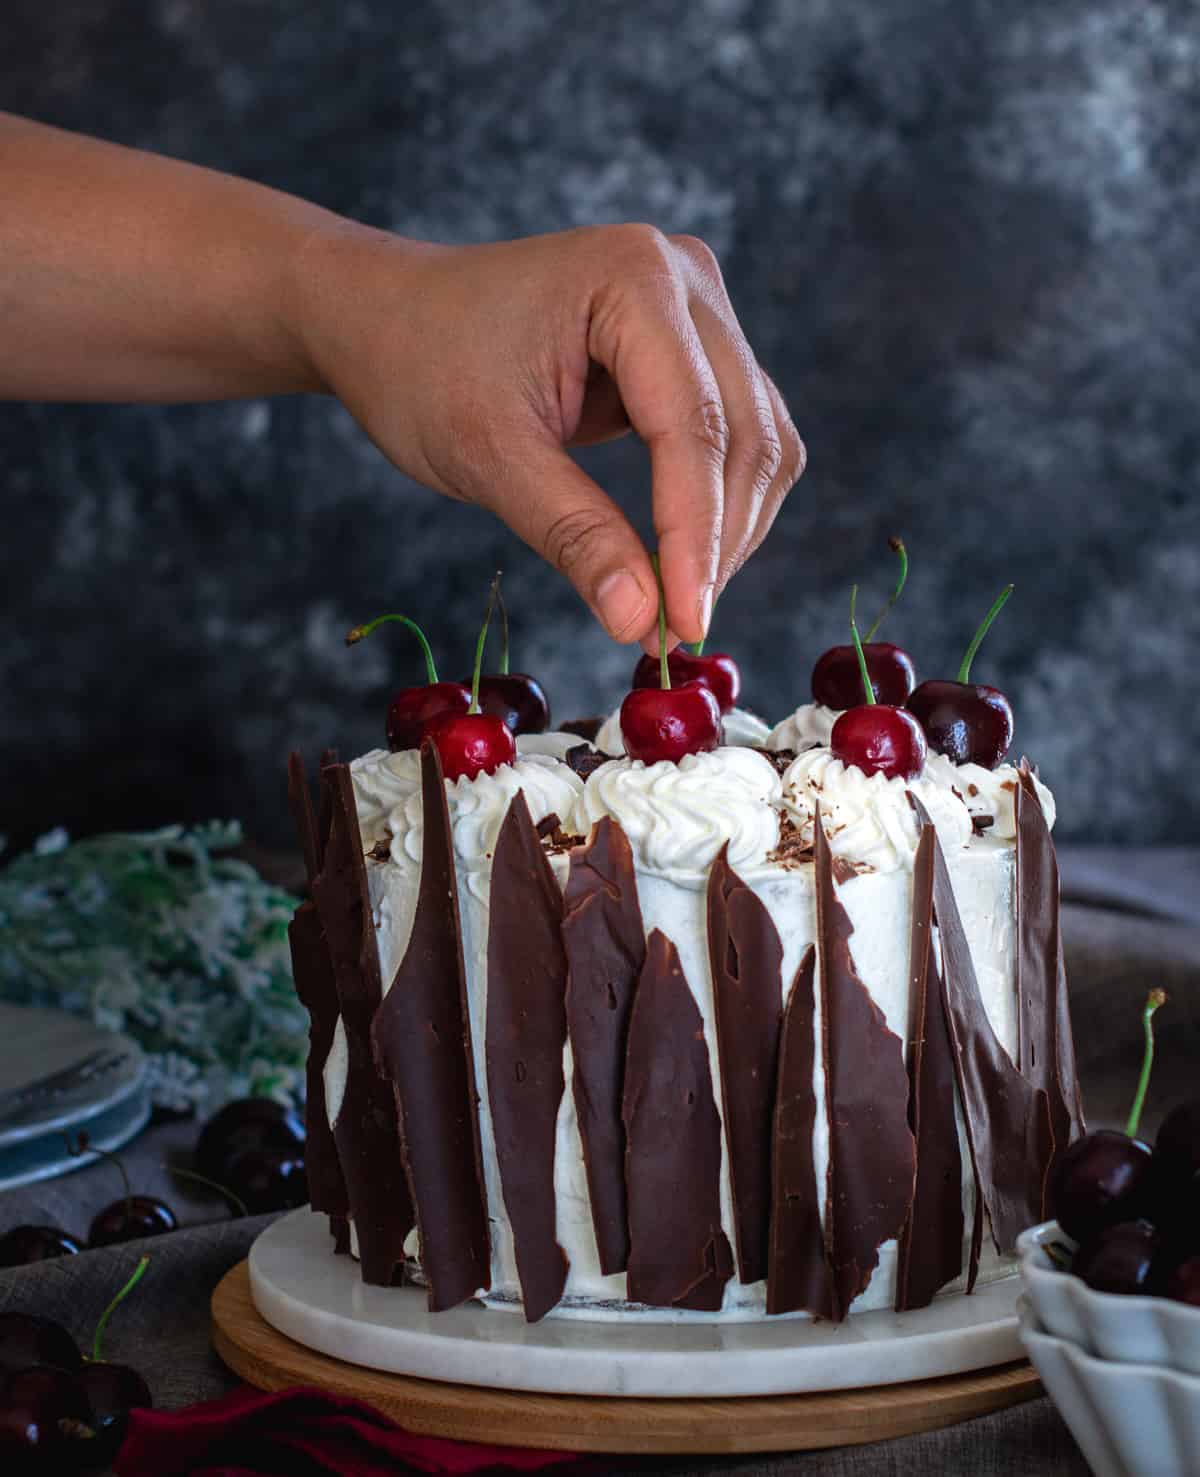 Placing cherries on the black forest cake 